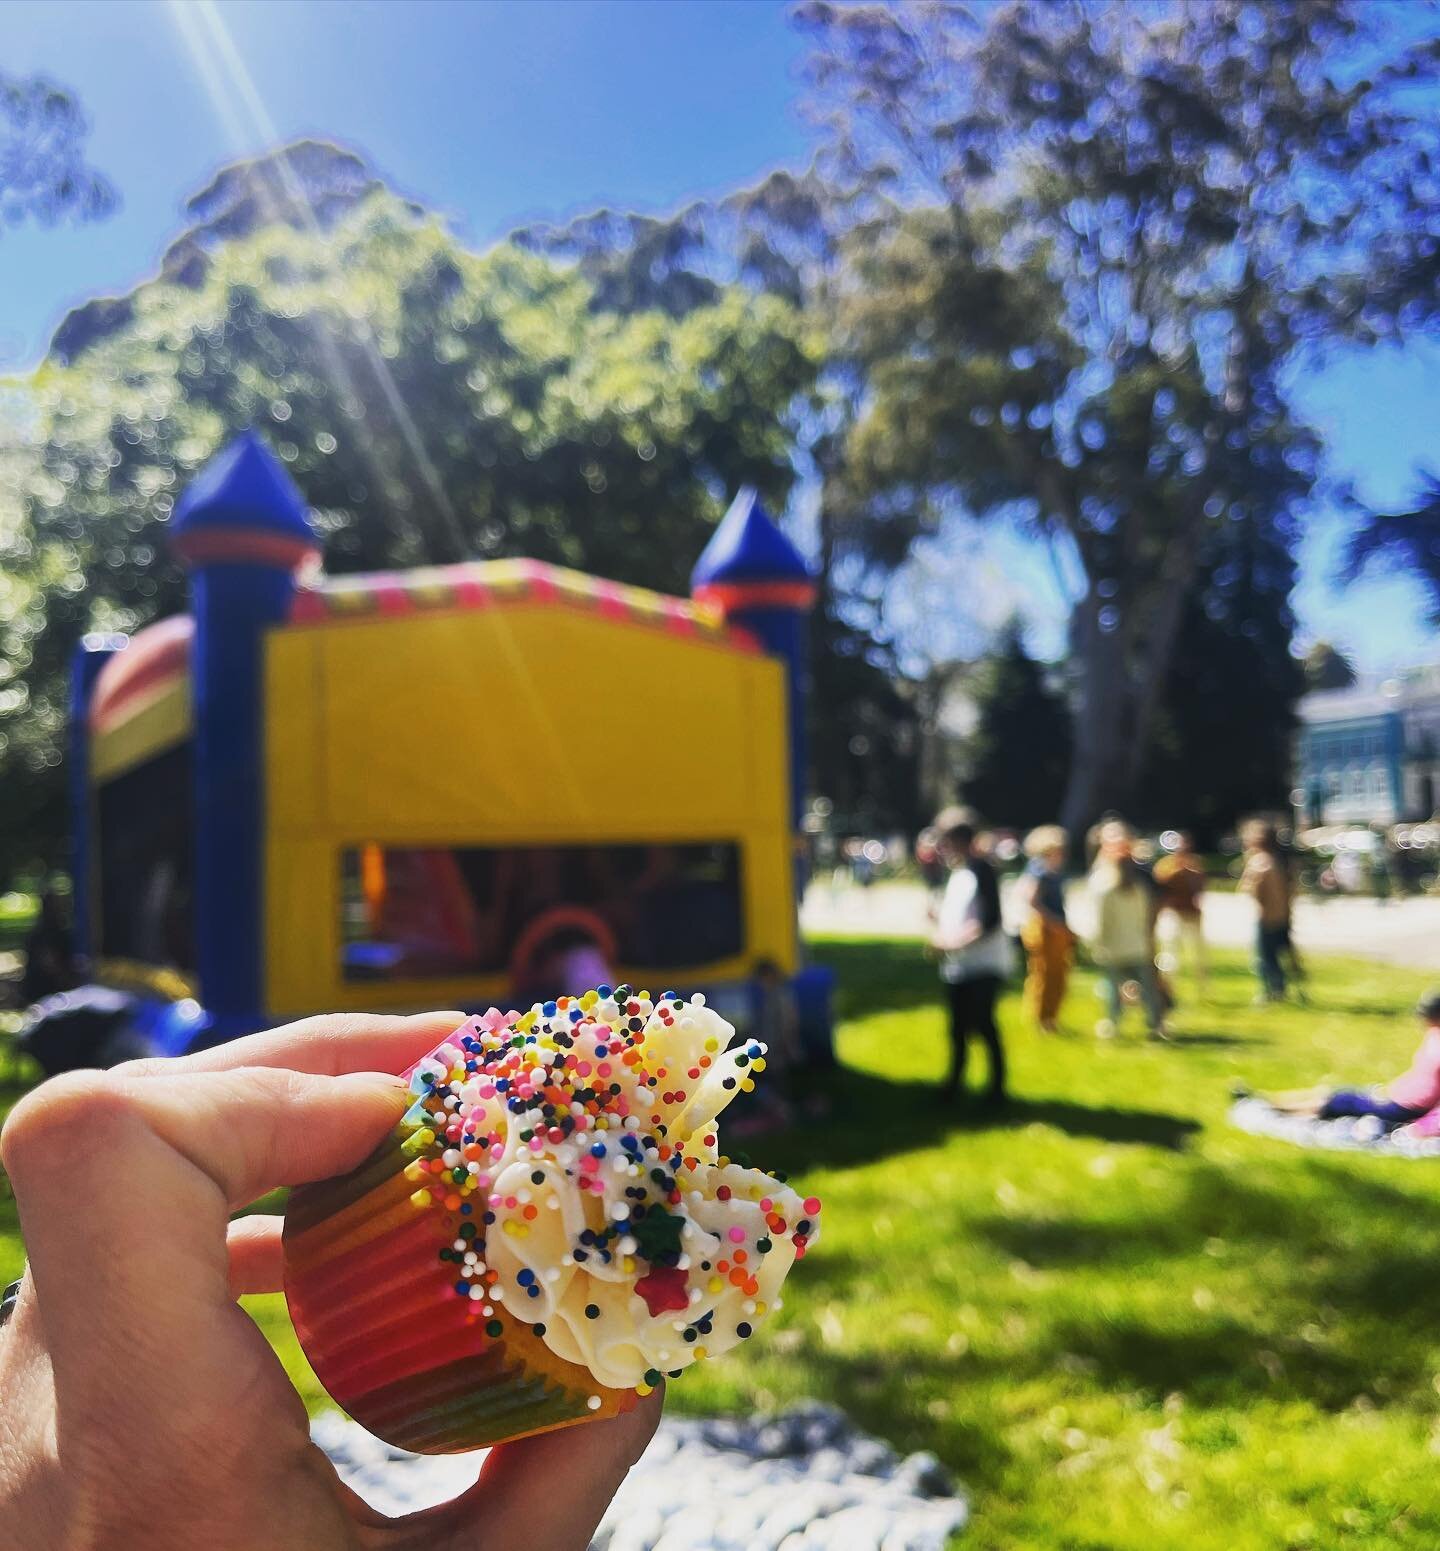 Weekends spent like this right now. Not complaining. 🌈🧁🥳

#rainbowsprinkles #bouncycastle #sunshine #sanfrancisco #toddlerbirthday